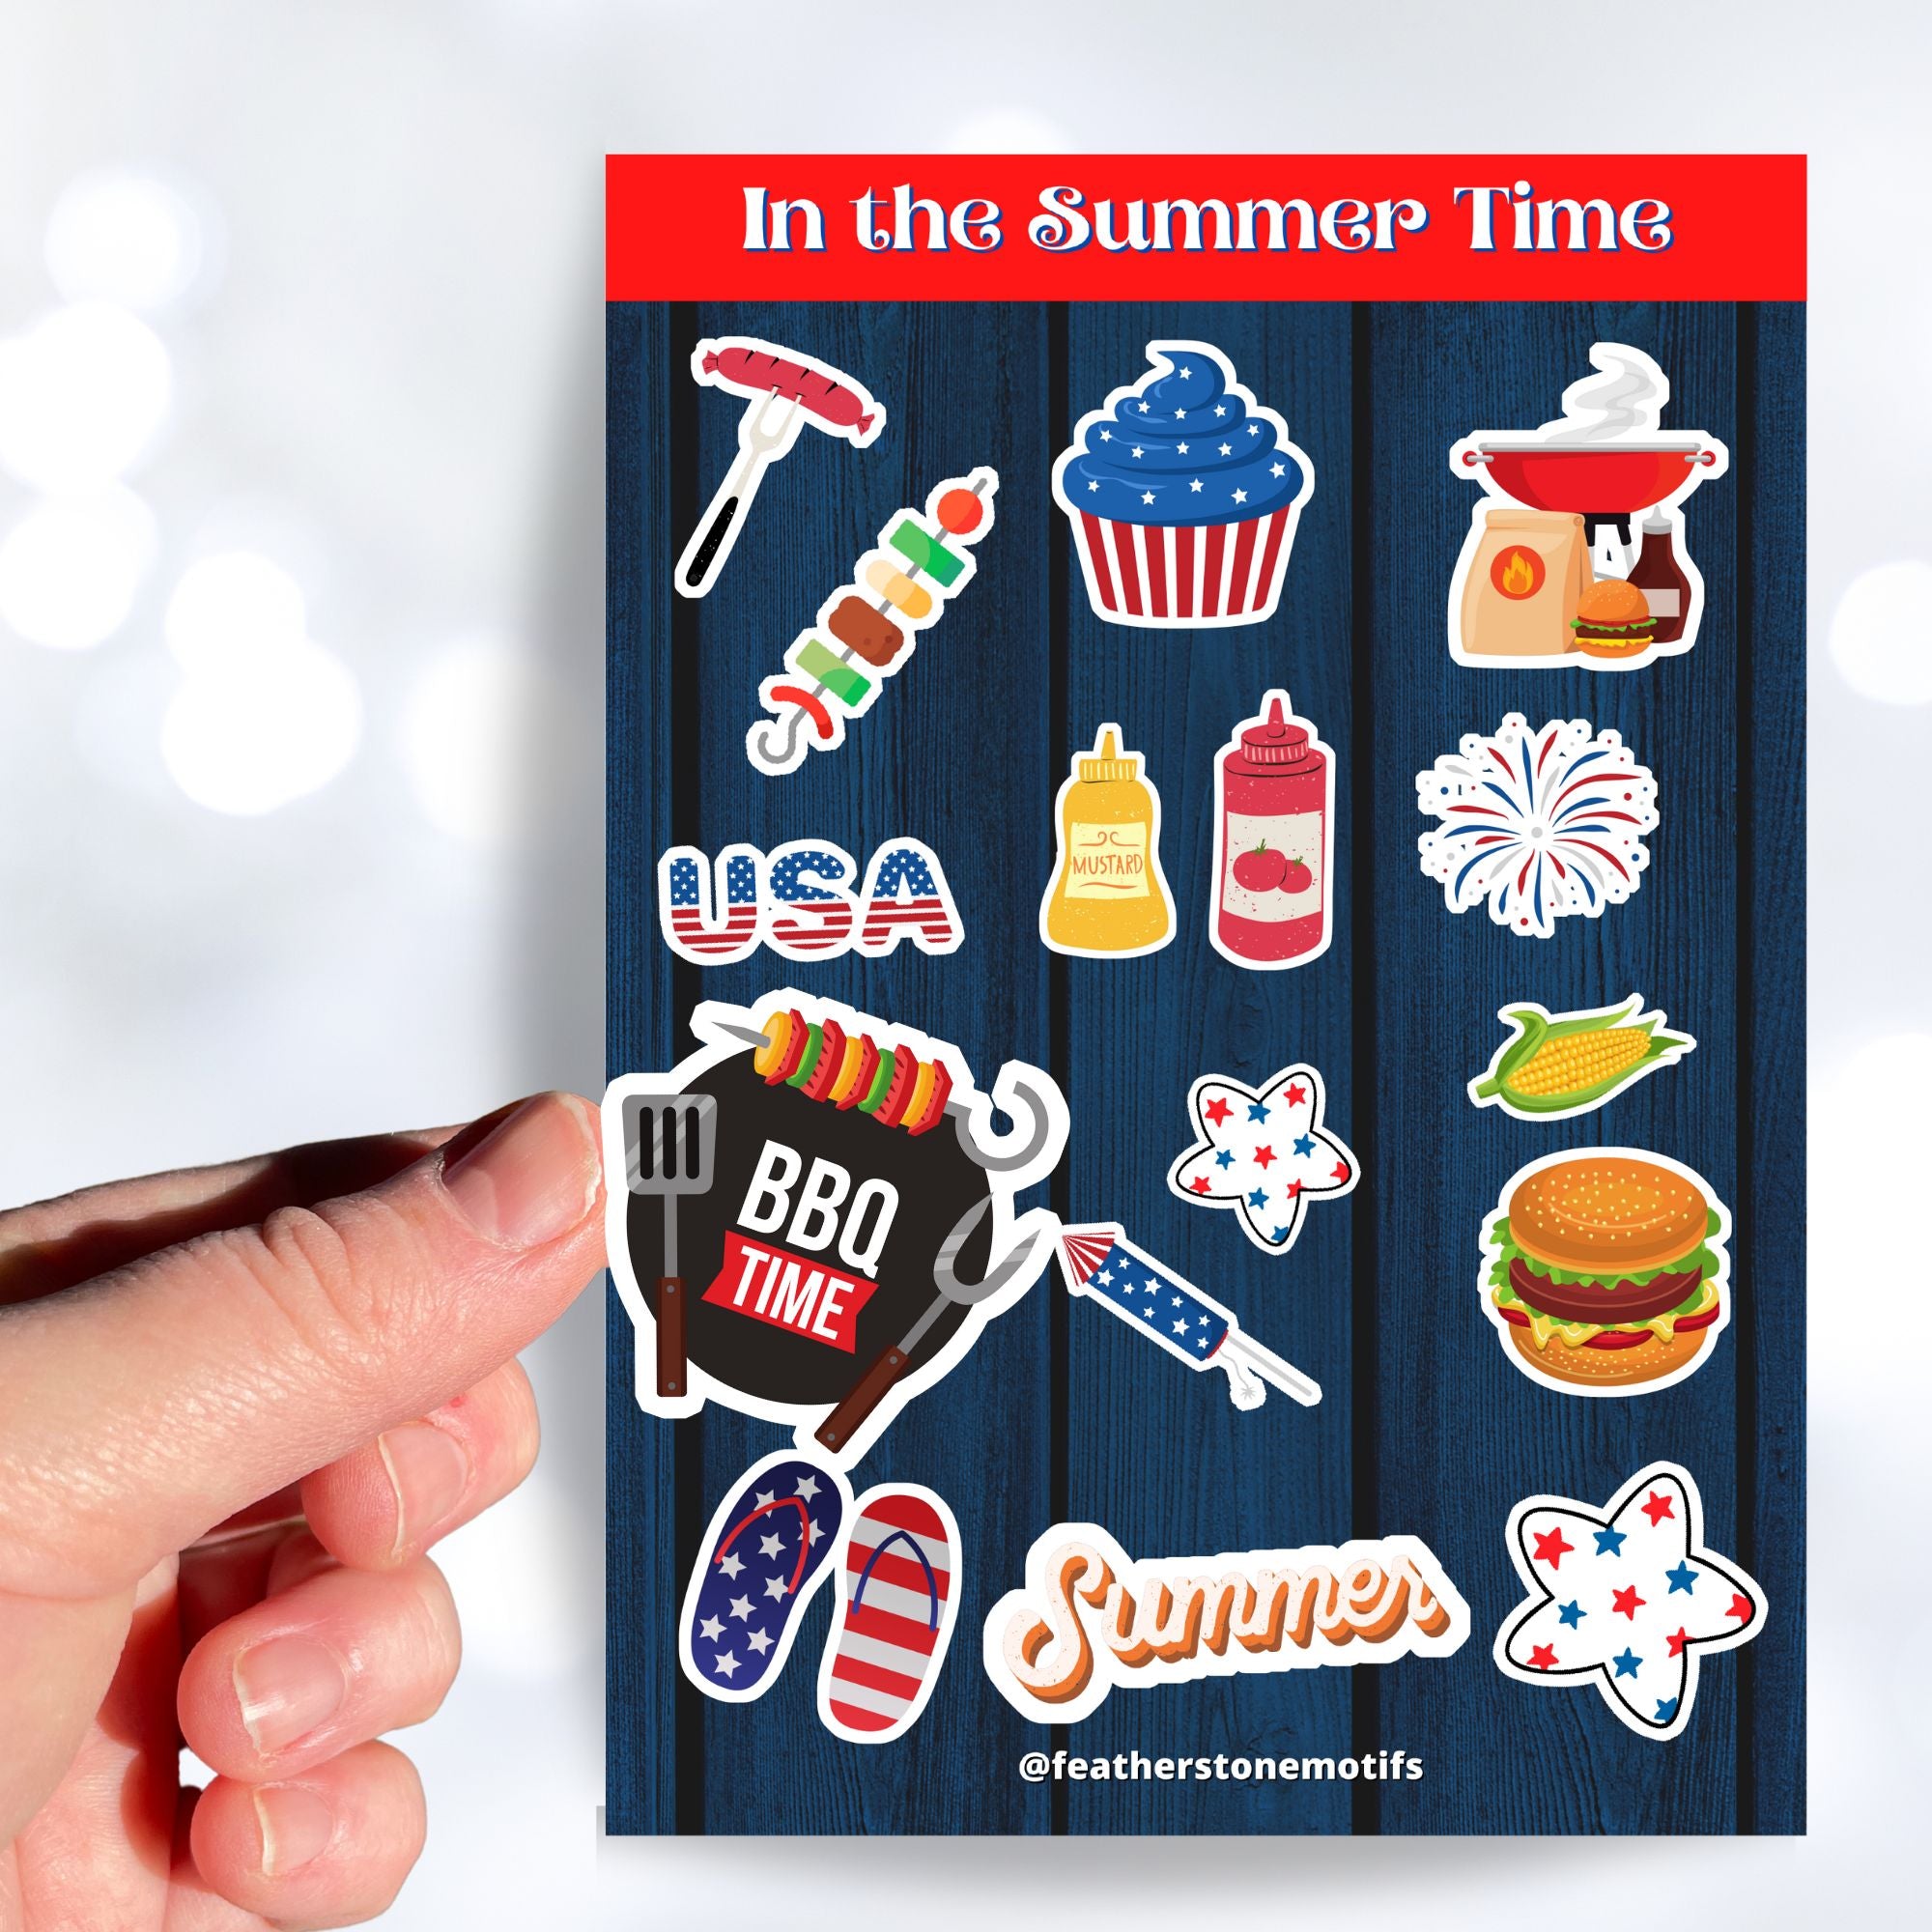 Celebrate summer, and the 4th of July in the USA. This sticker sheet has all of your favorite summer time foods like BBQing, burgers, hot dogs, and corn on the cob. Plus fireworks and red, white, and blue images. This image shows a hand holding a sticker of a grill (or BBQ) over the sticker sheet.